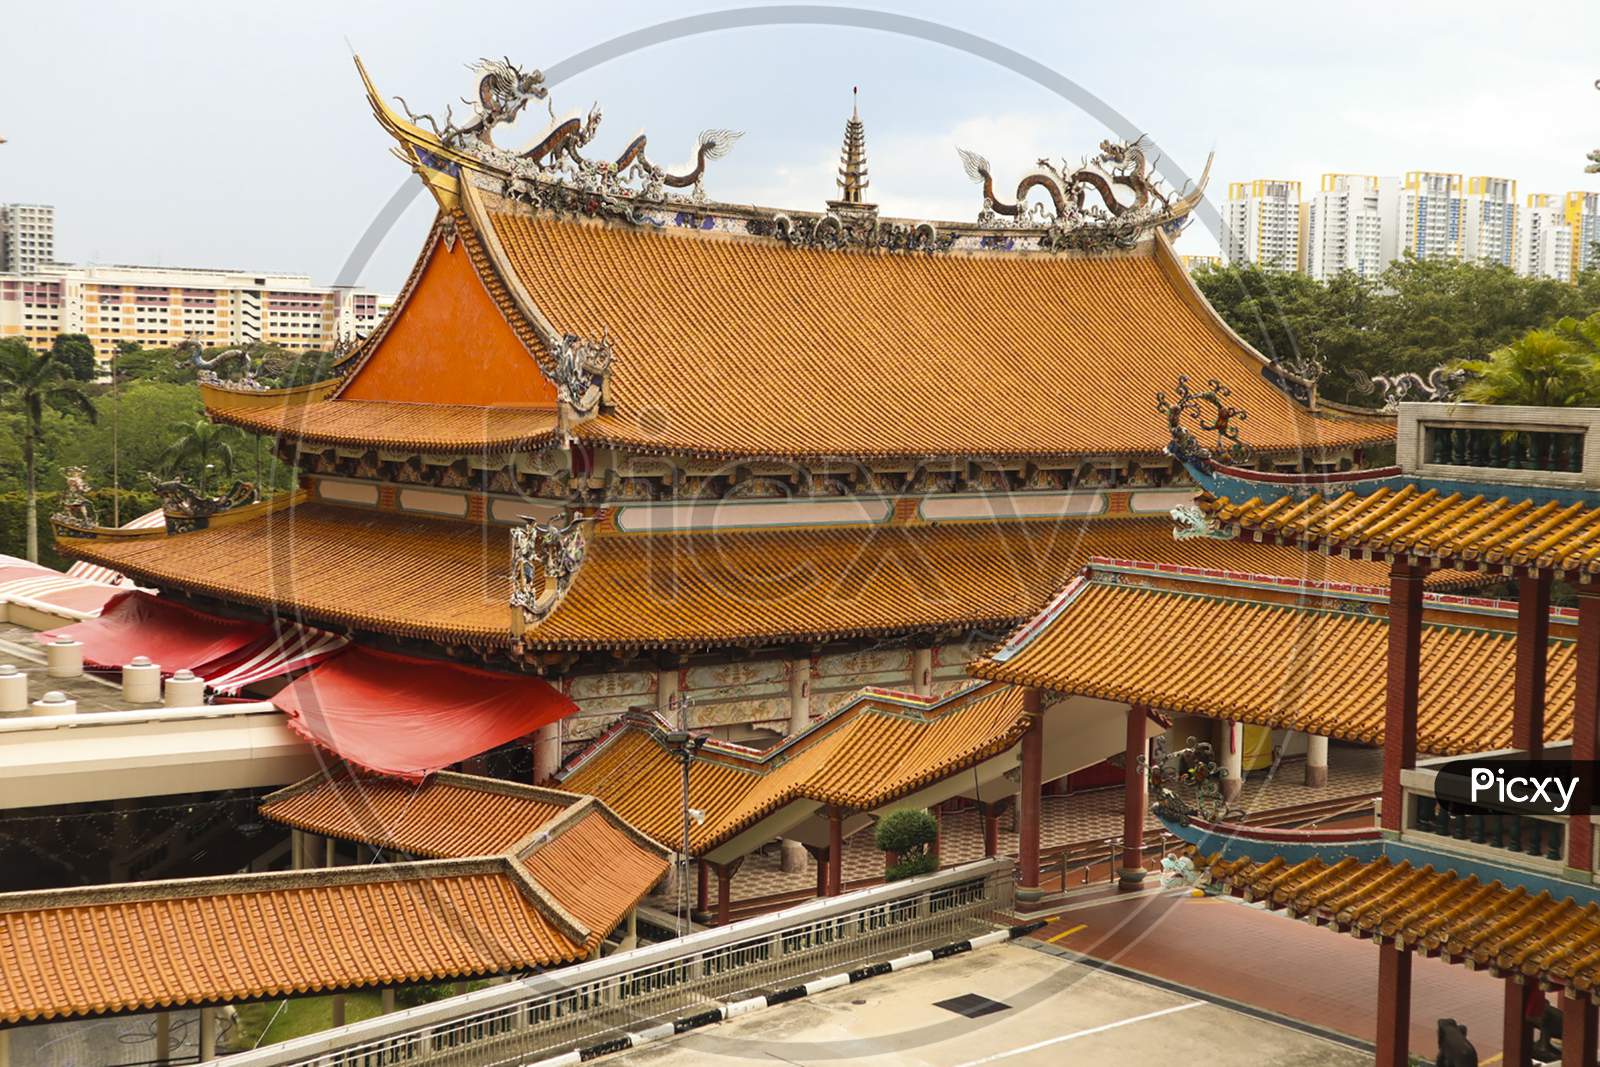 View of Chinese architecture temple complex at Buddhist Monastery